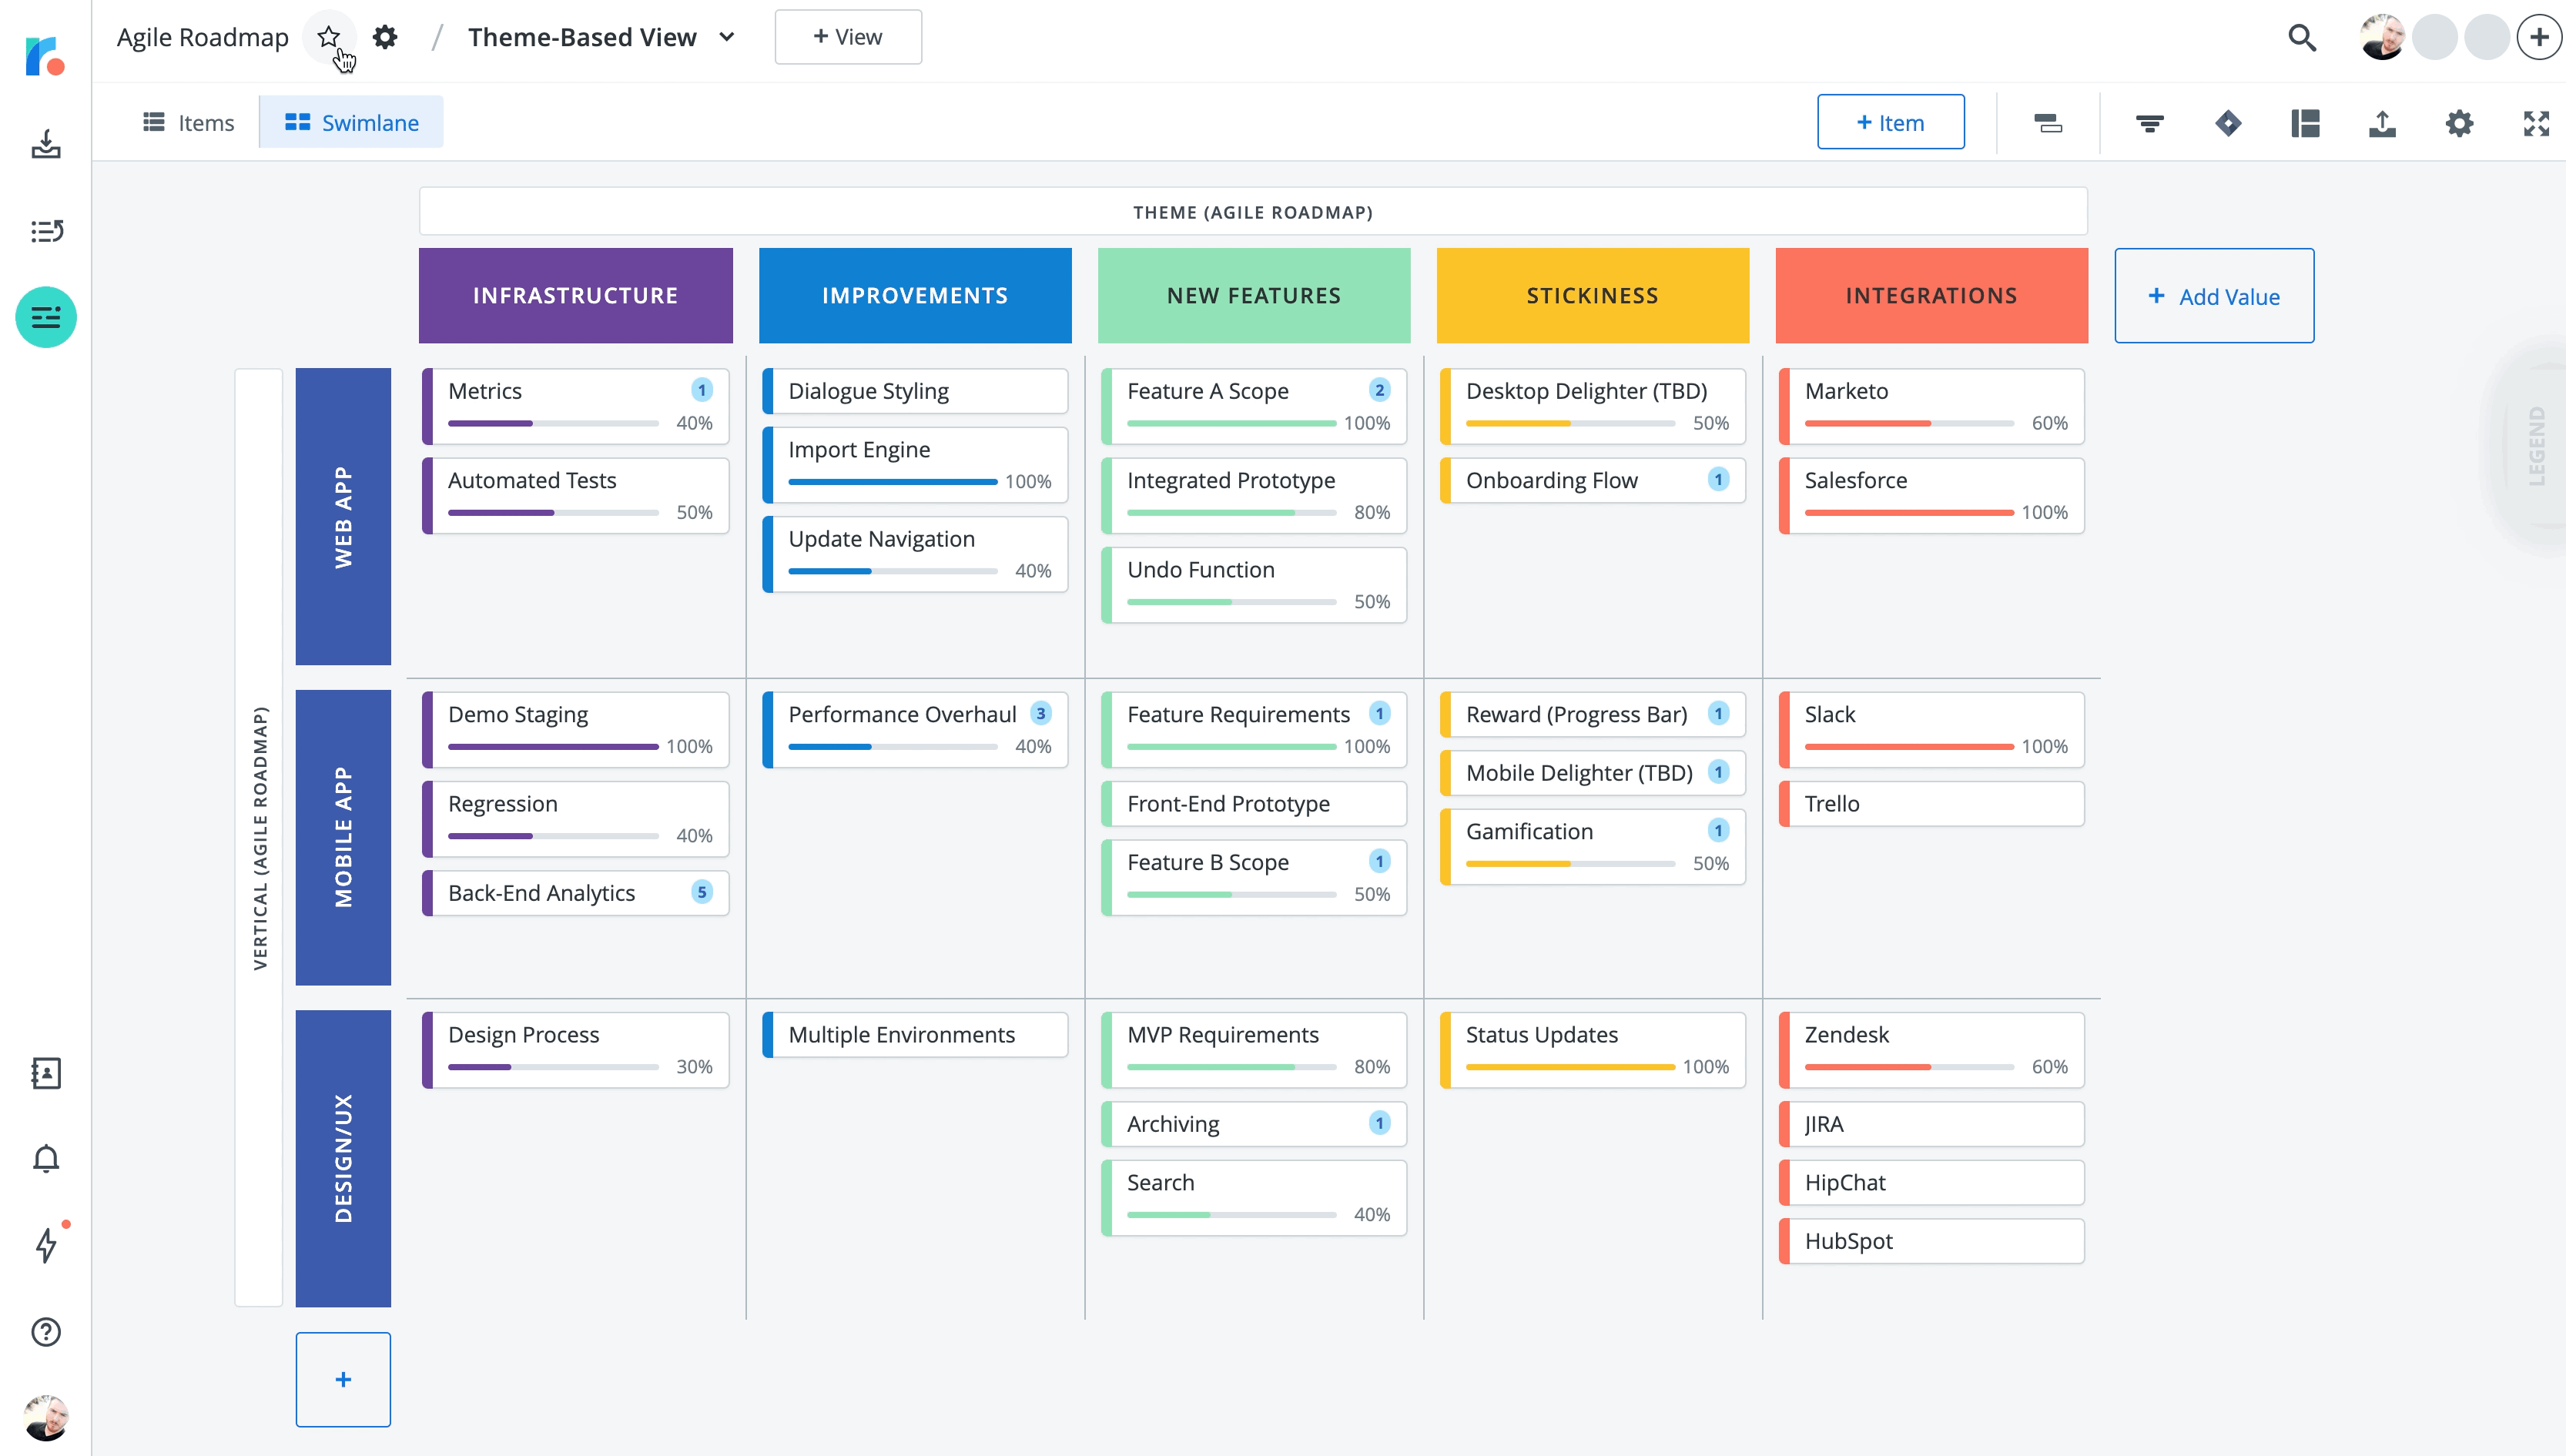 faves-inRoadmap.gif